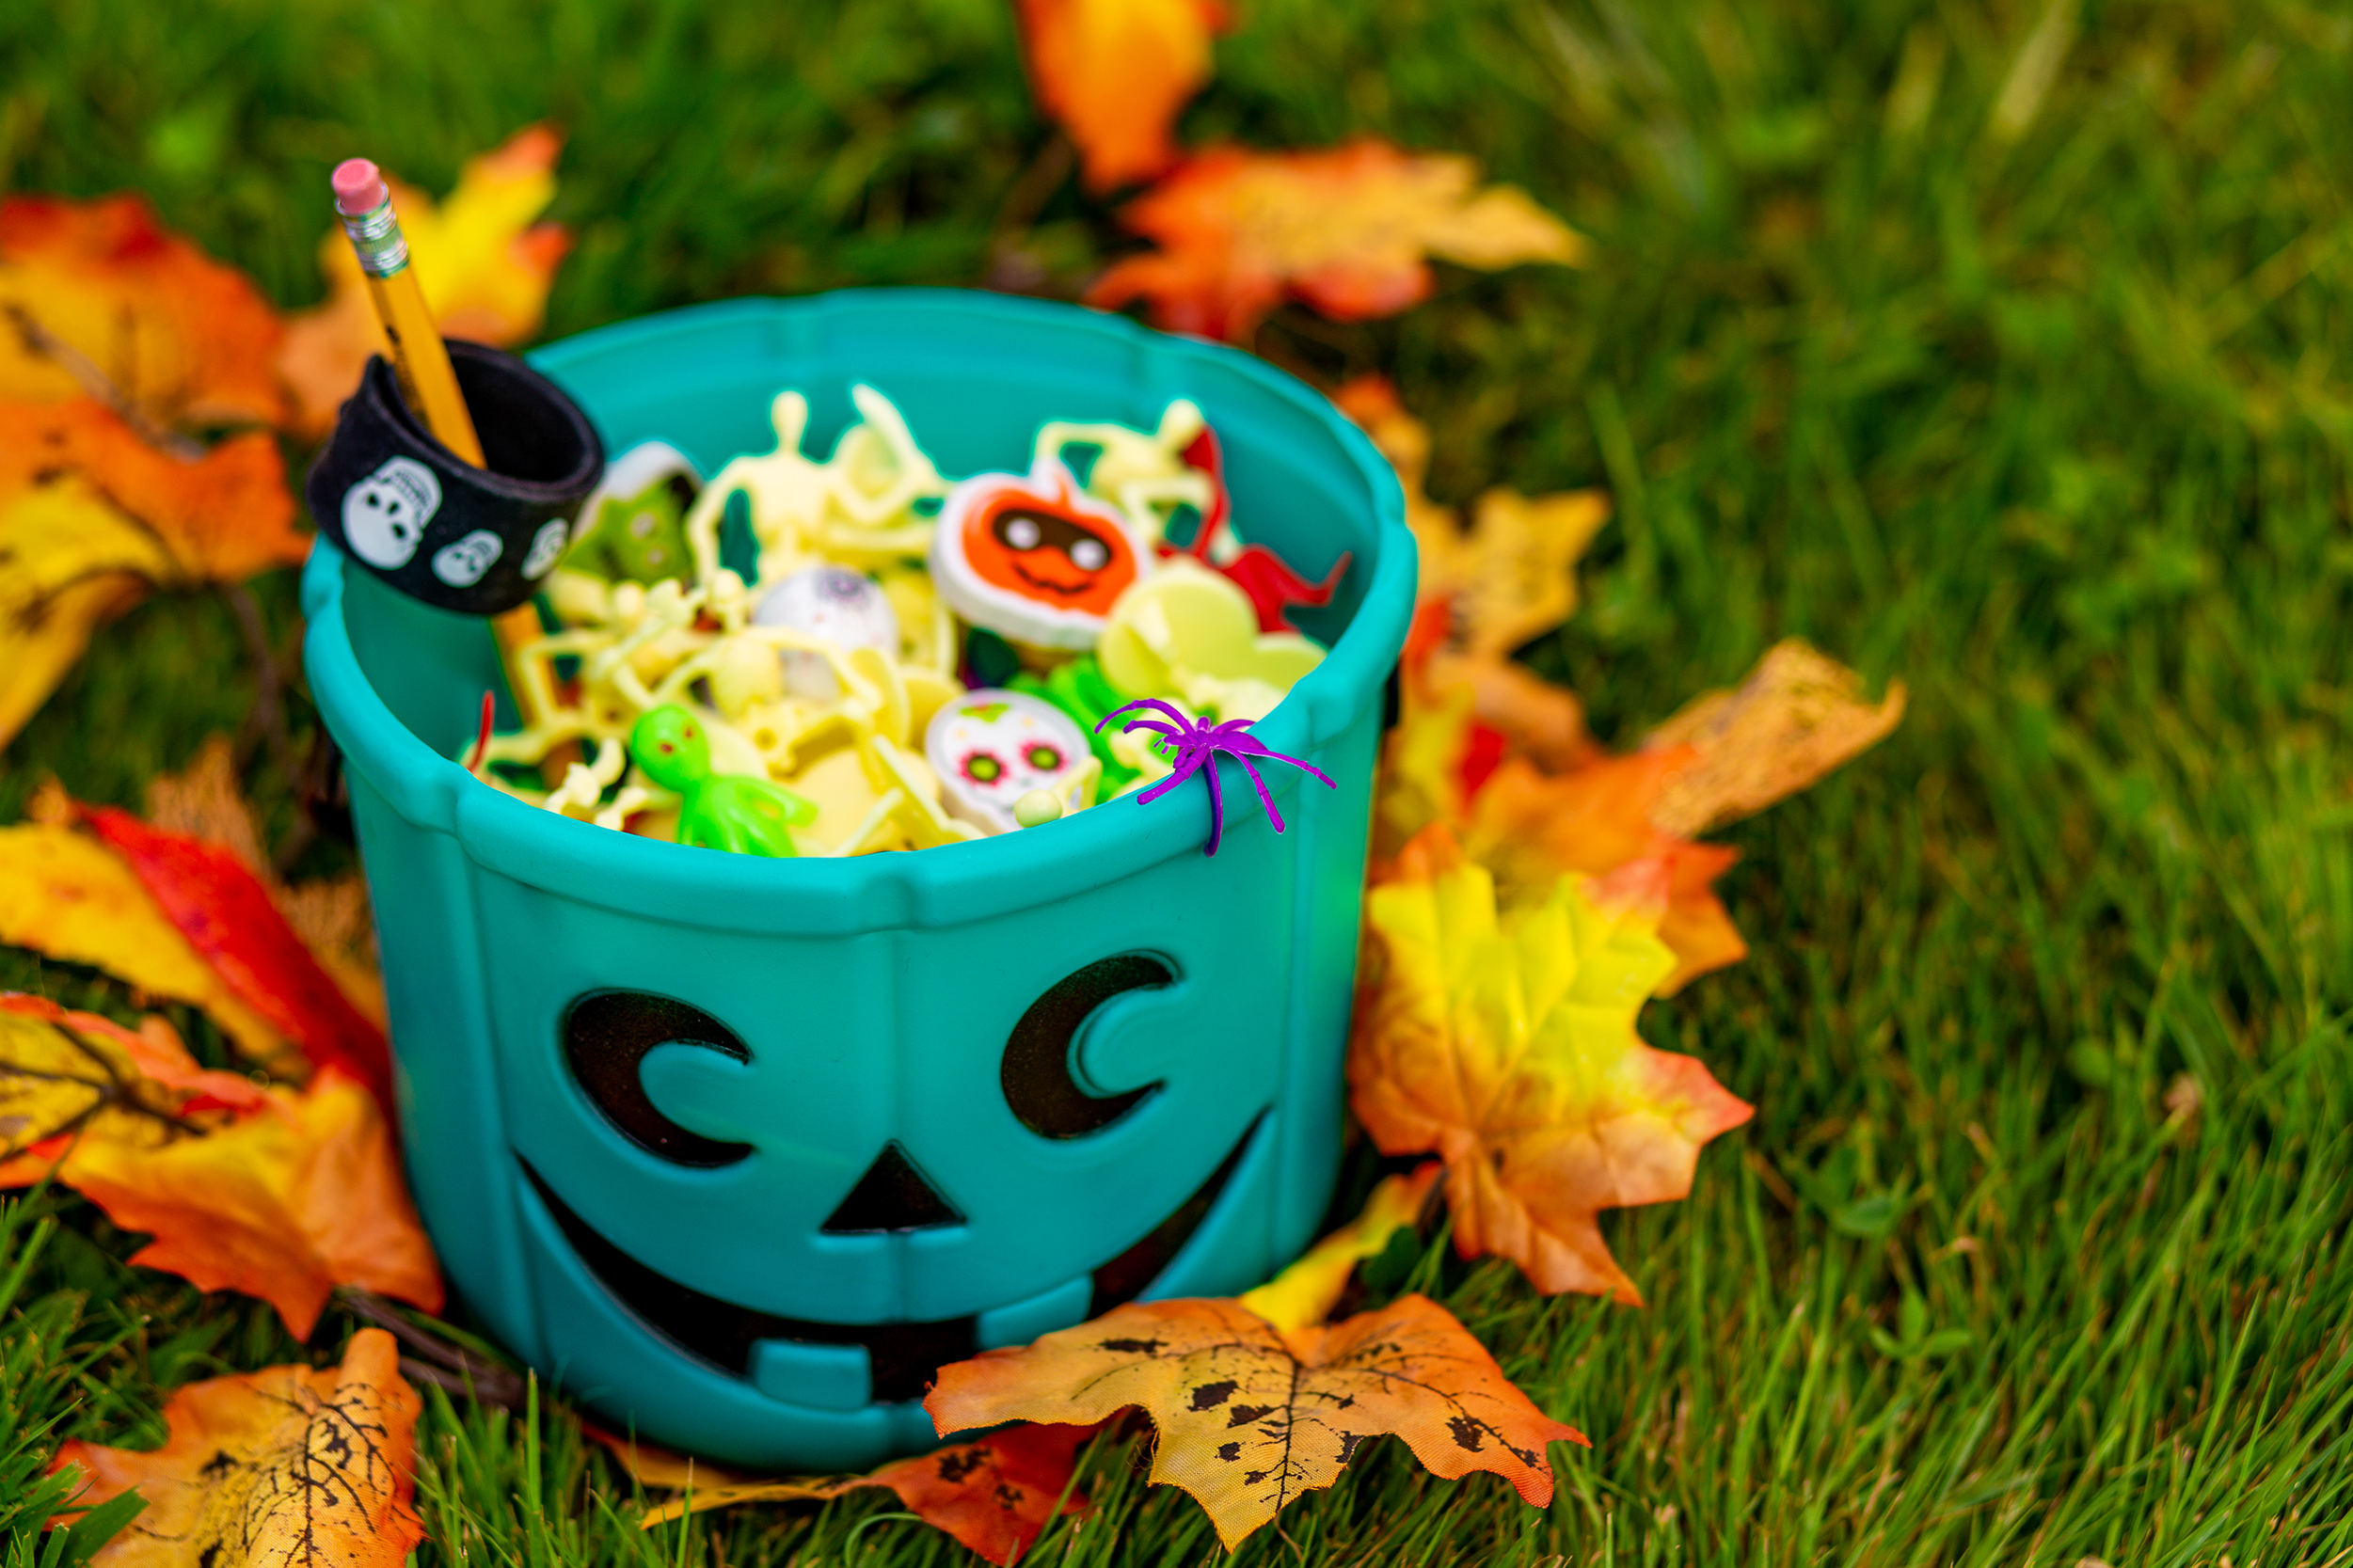 Non-Candy Giveaways for Trick-or-Treaters